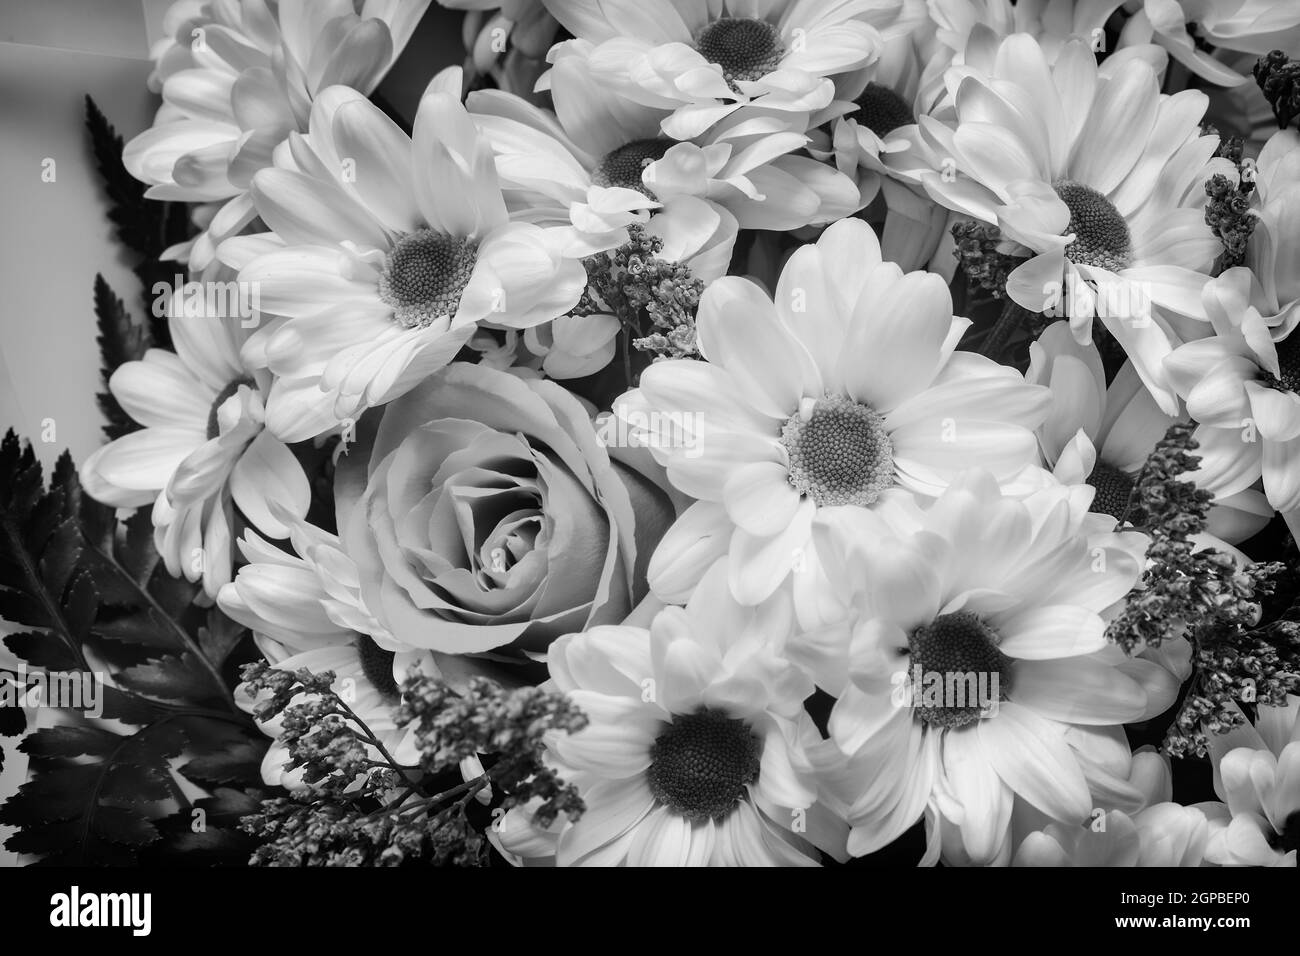 Beautiful white chrysanthemum in a bouquet among other flowers. Presented close-up. Stock Photo